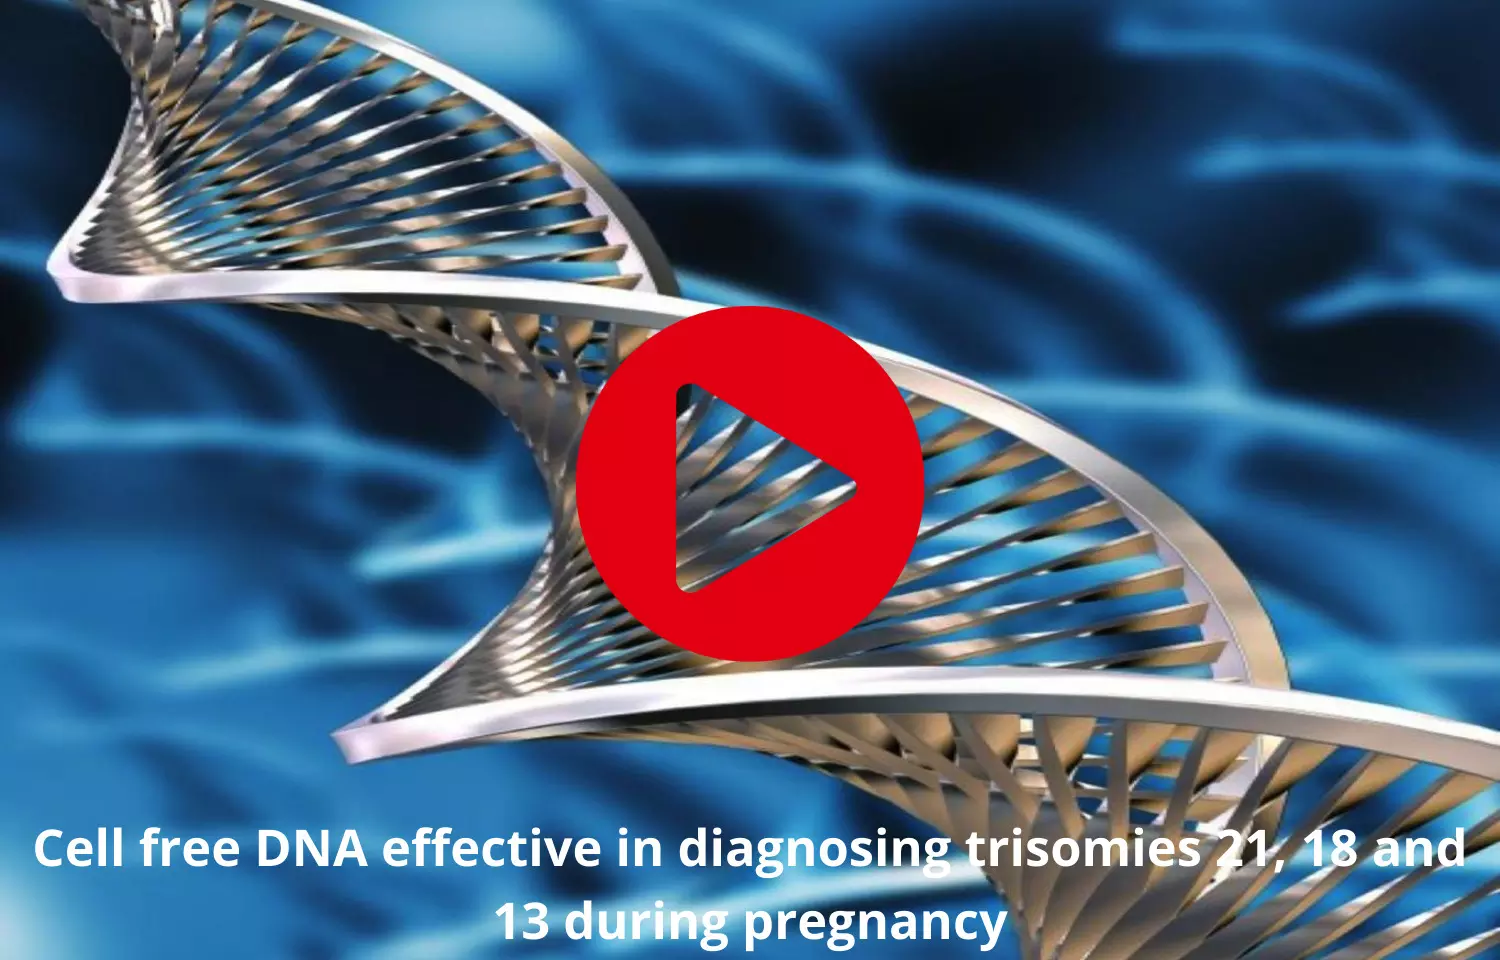 Cell free DNA as diagnosing tool in trisomies 21, 18 and 13 during pregnancy